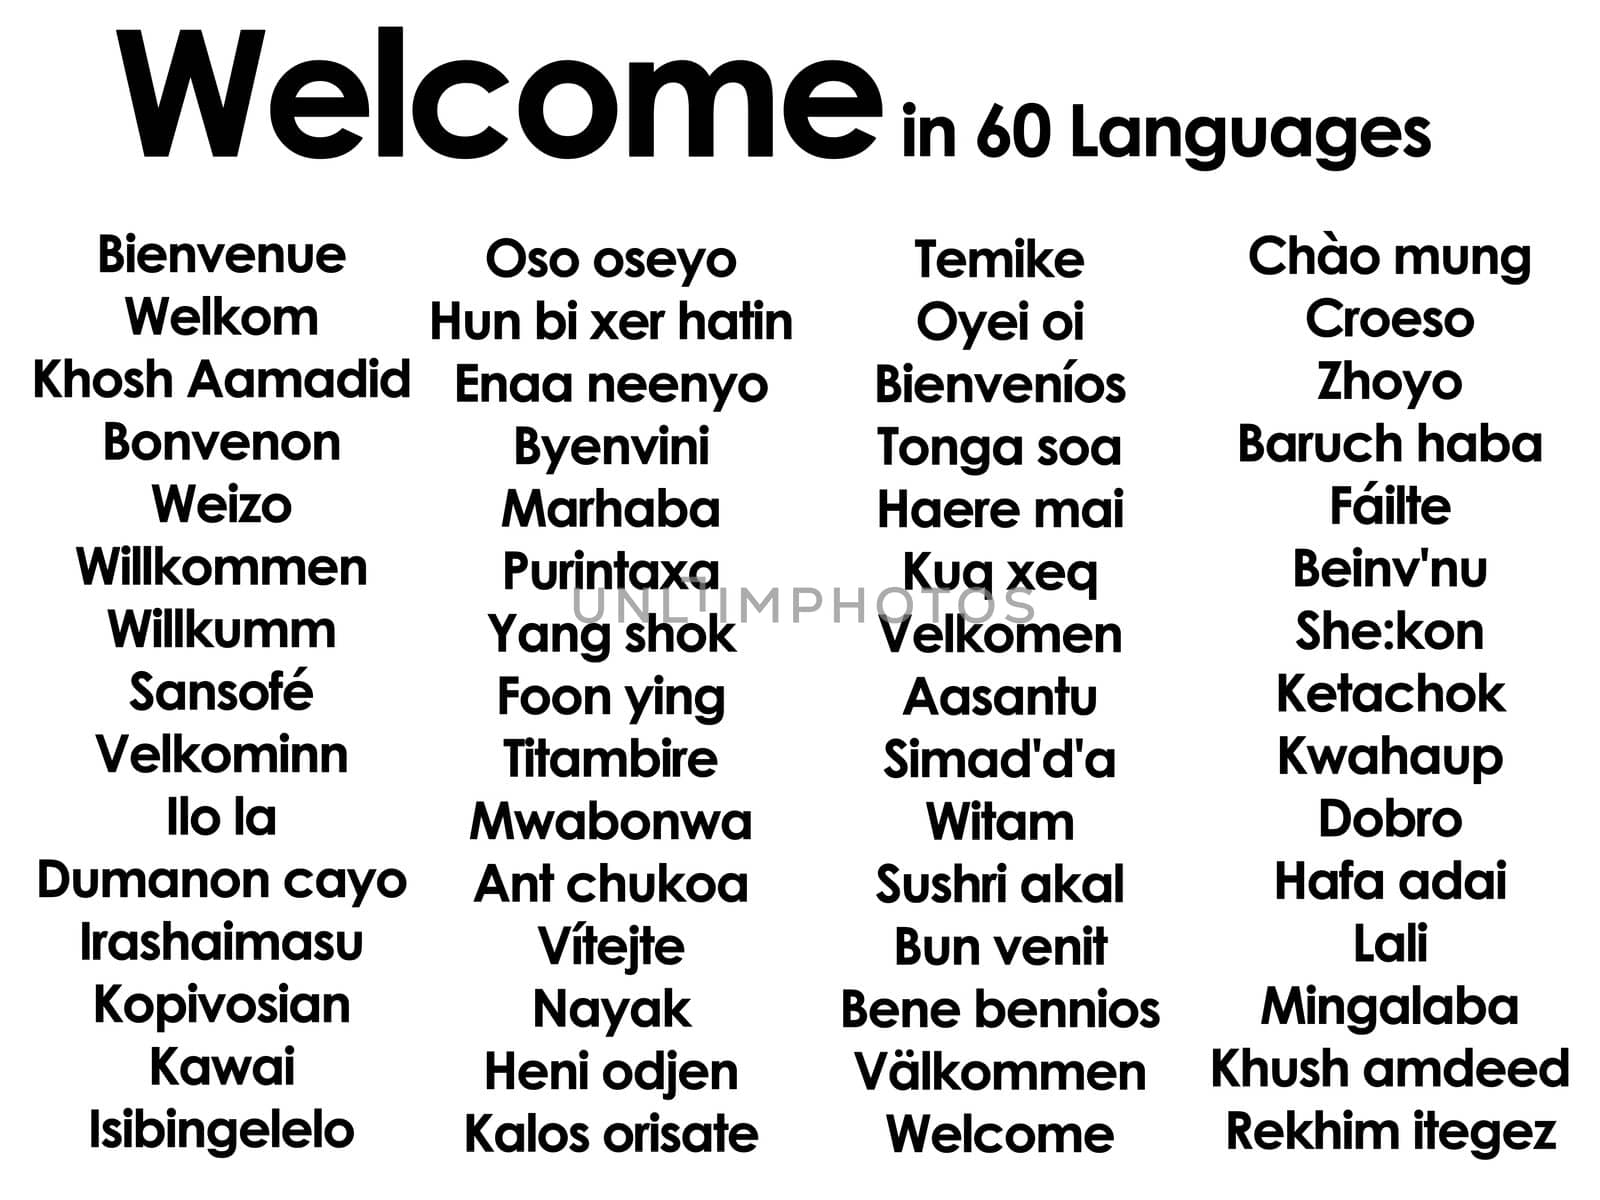 Welcome marhaba wilcommen written in lots of 60 different languages